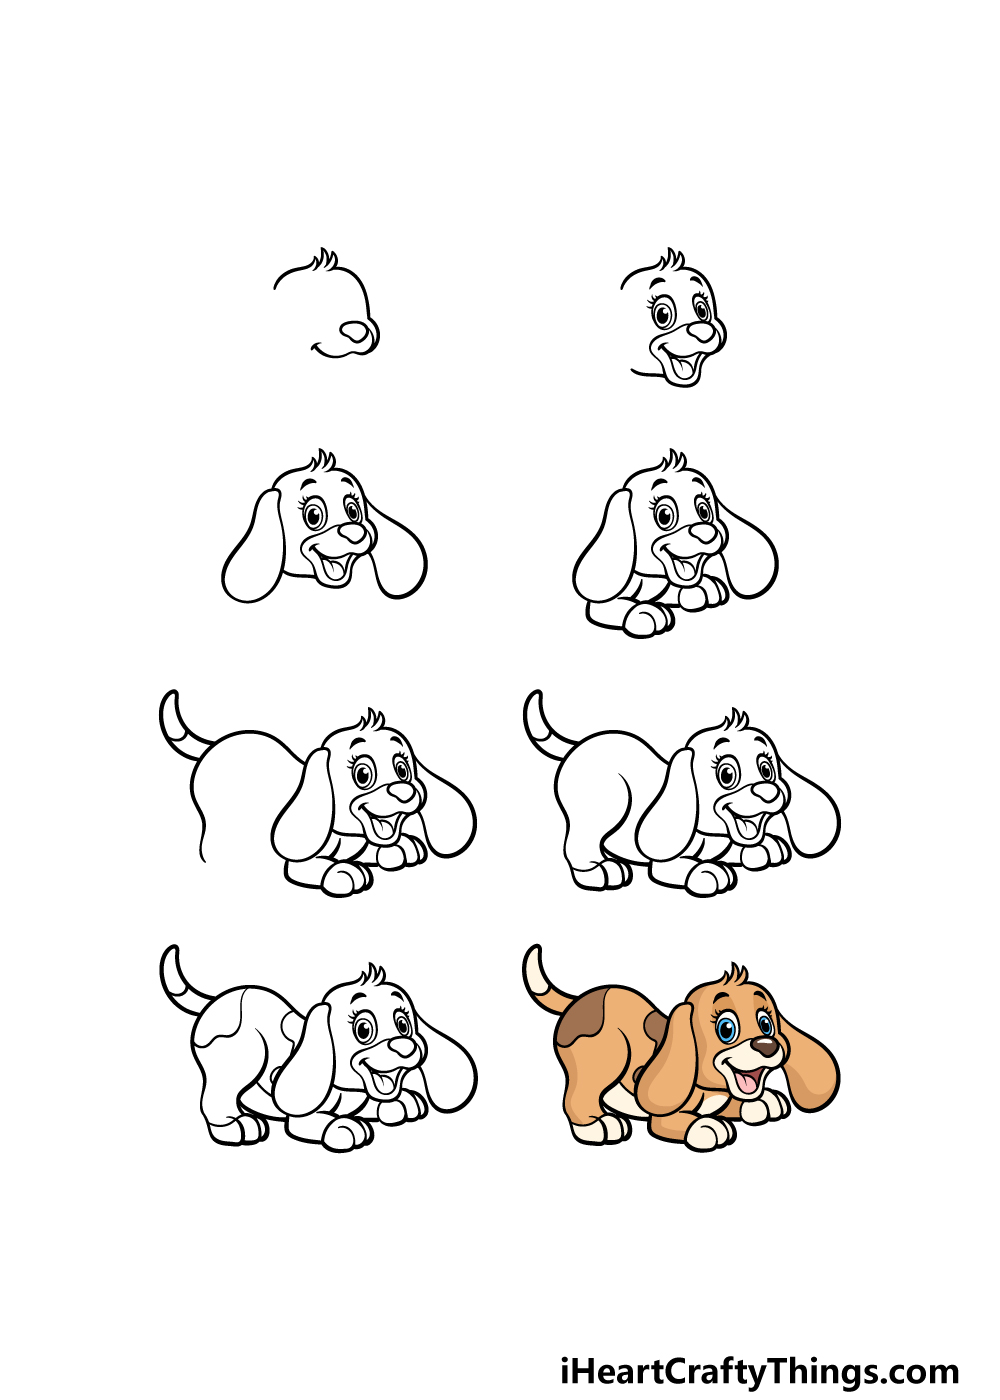 how to draw a cartoon puppy in 8 steps